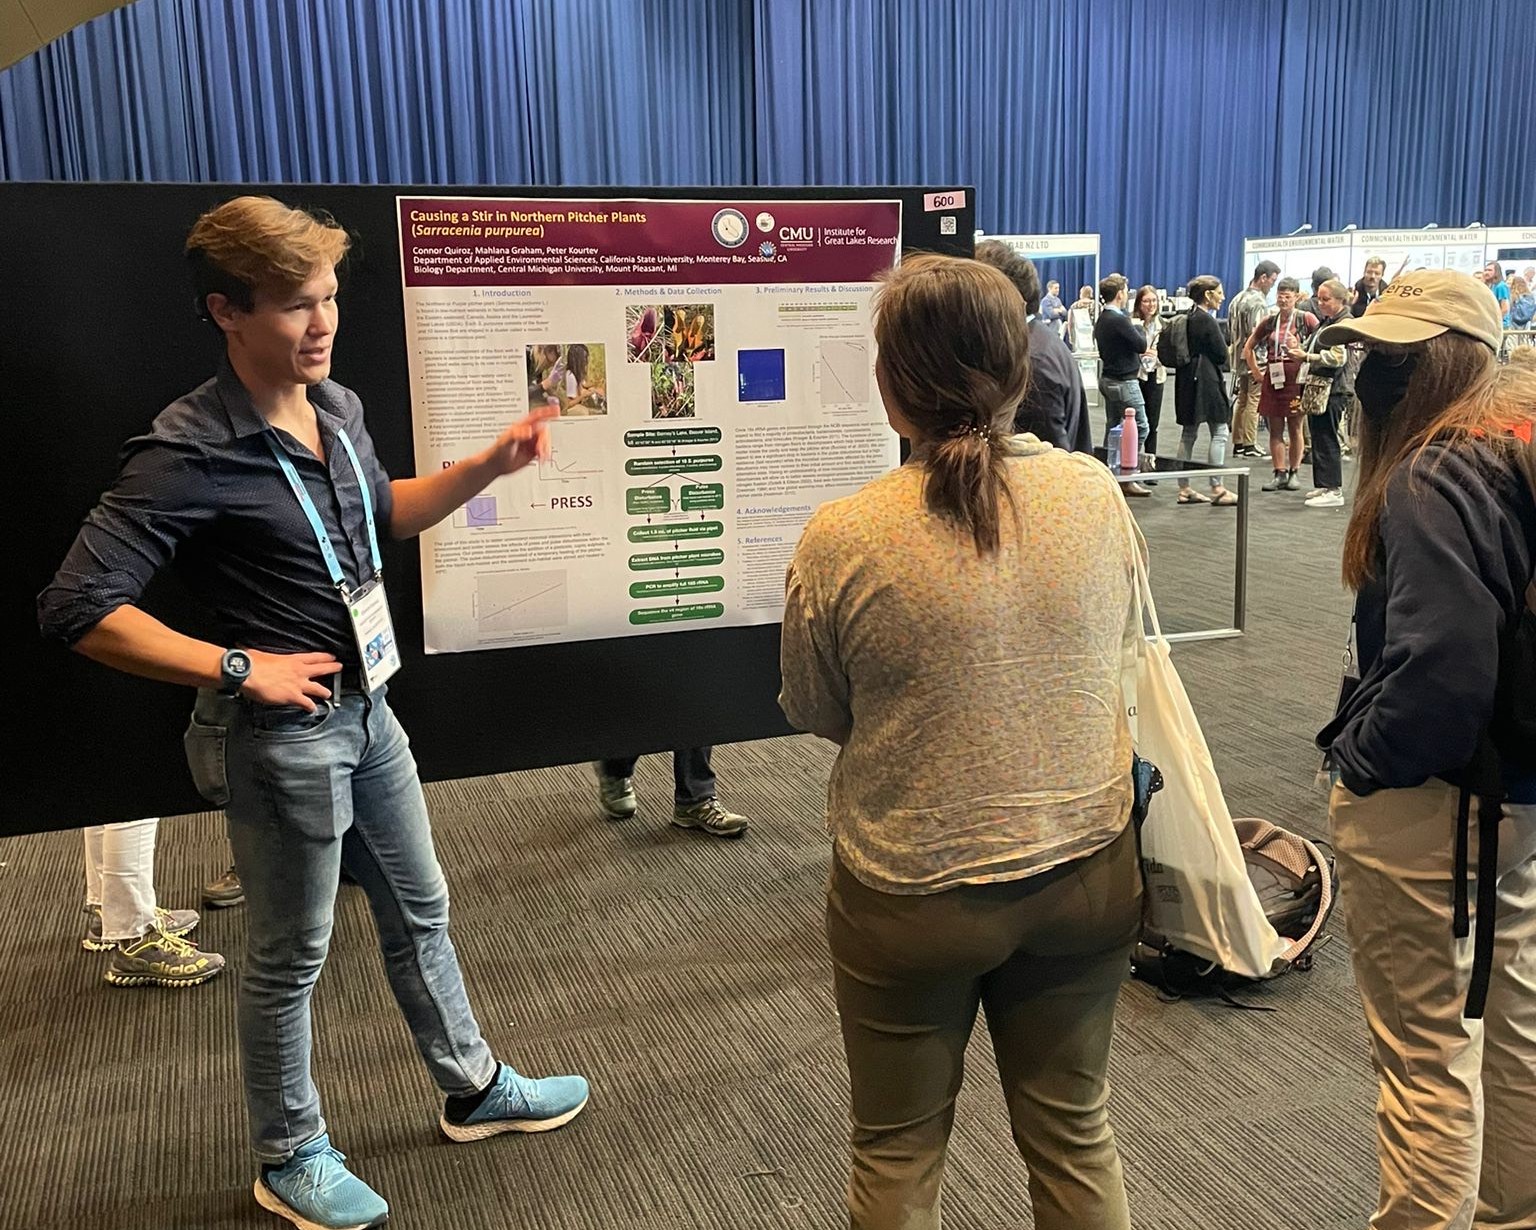 Conor pointing to his research poster while talking to a person. Conor's standing to the side with a hand on his hip.